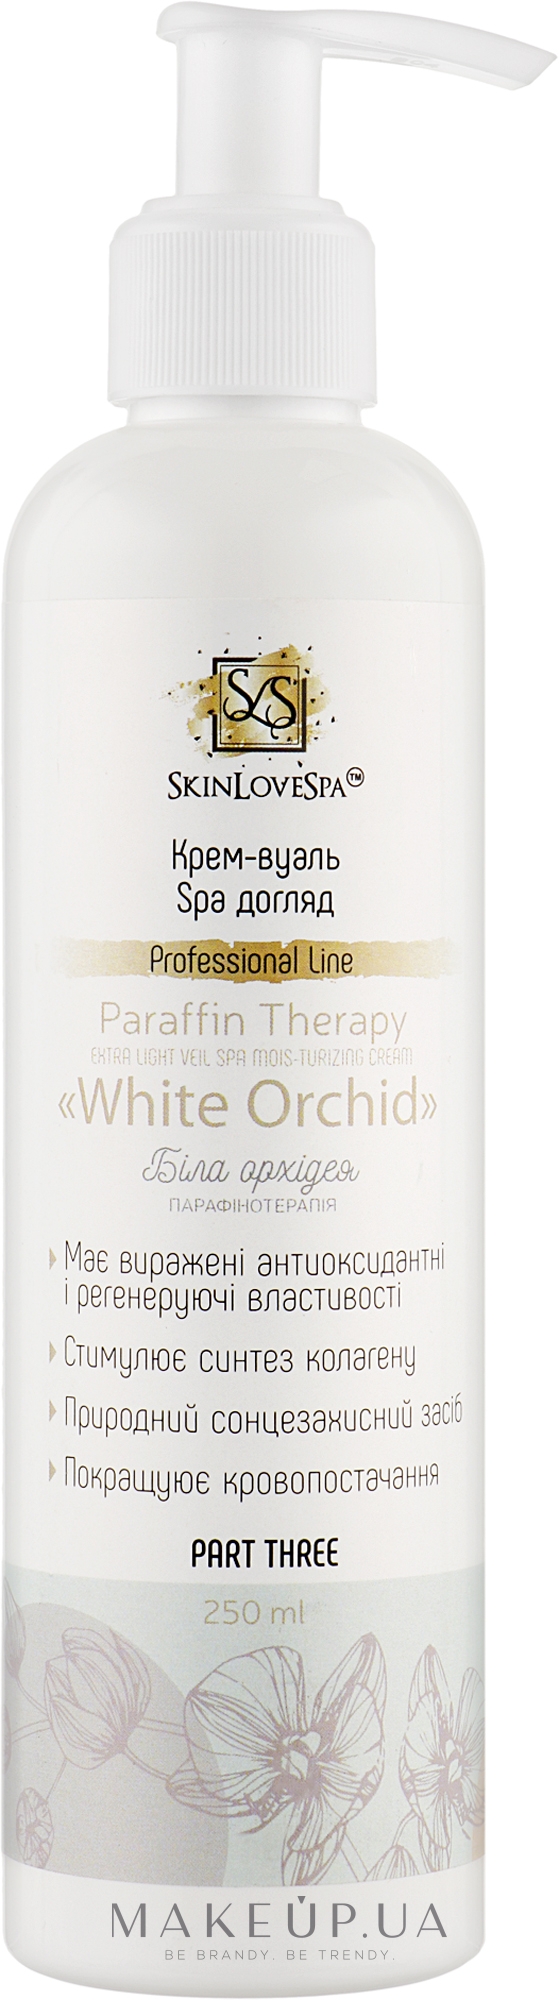 Крем-вуаль "White Orсhid" - SkinLoveSpa Paraffin Therapy — фото 250ml